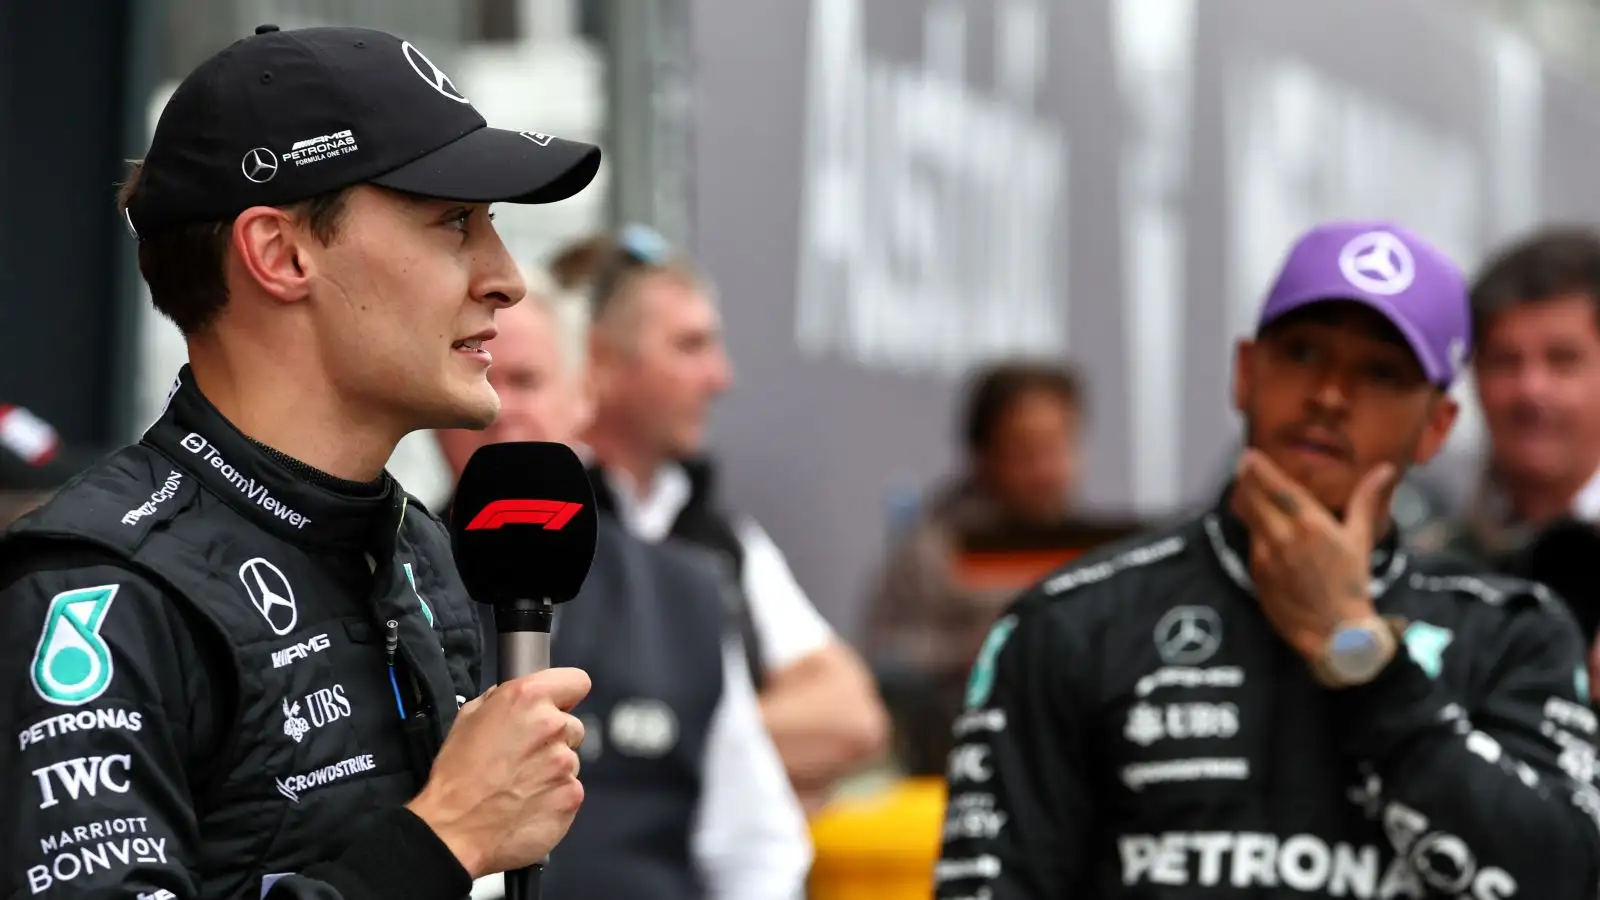 Tension Between Russell and Hamilton at Japanese GP Reveals Hamilton’s Desire to Keep Bottas